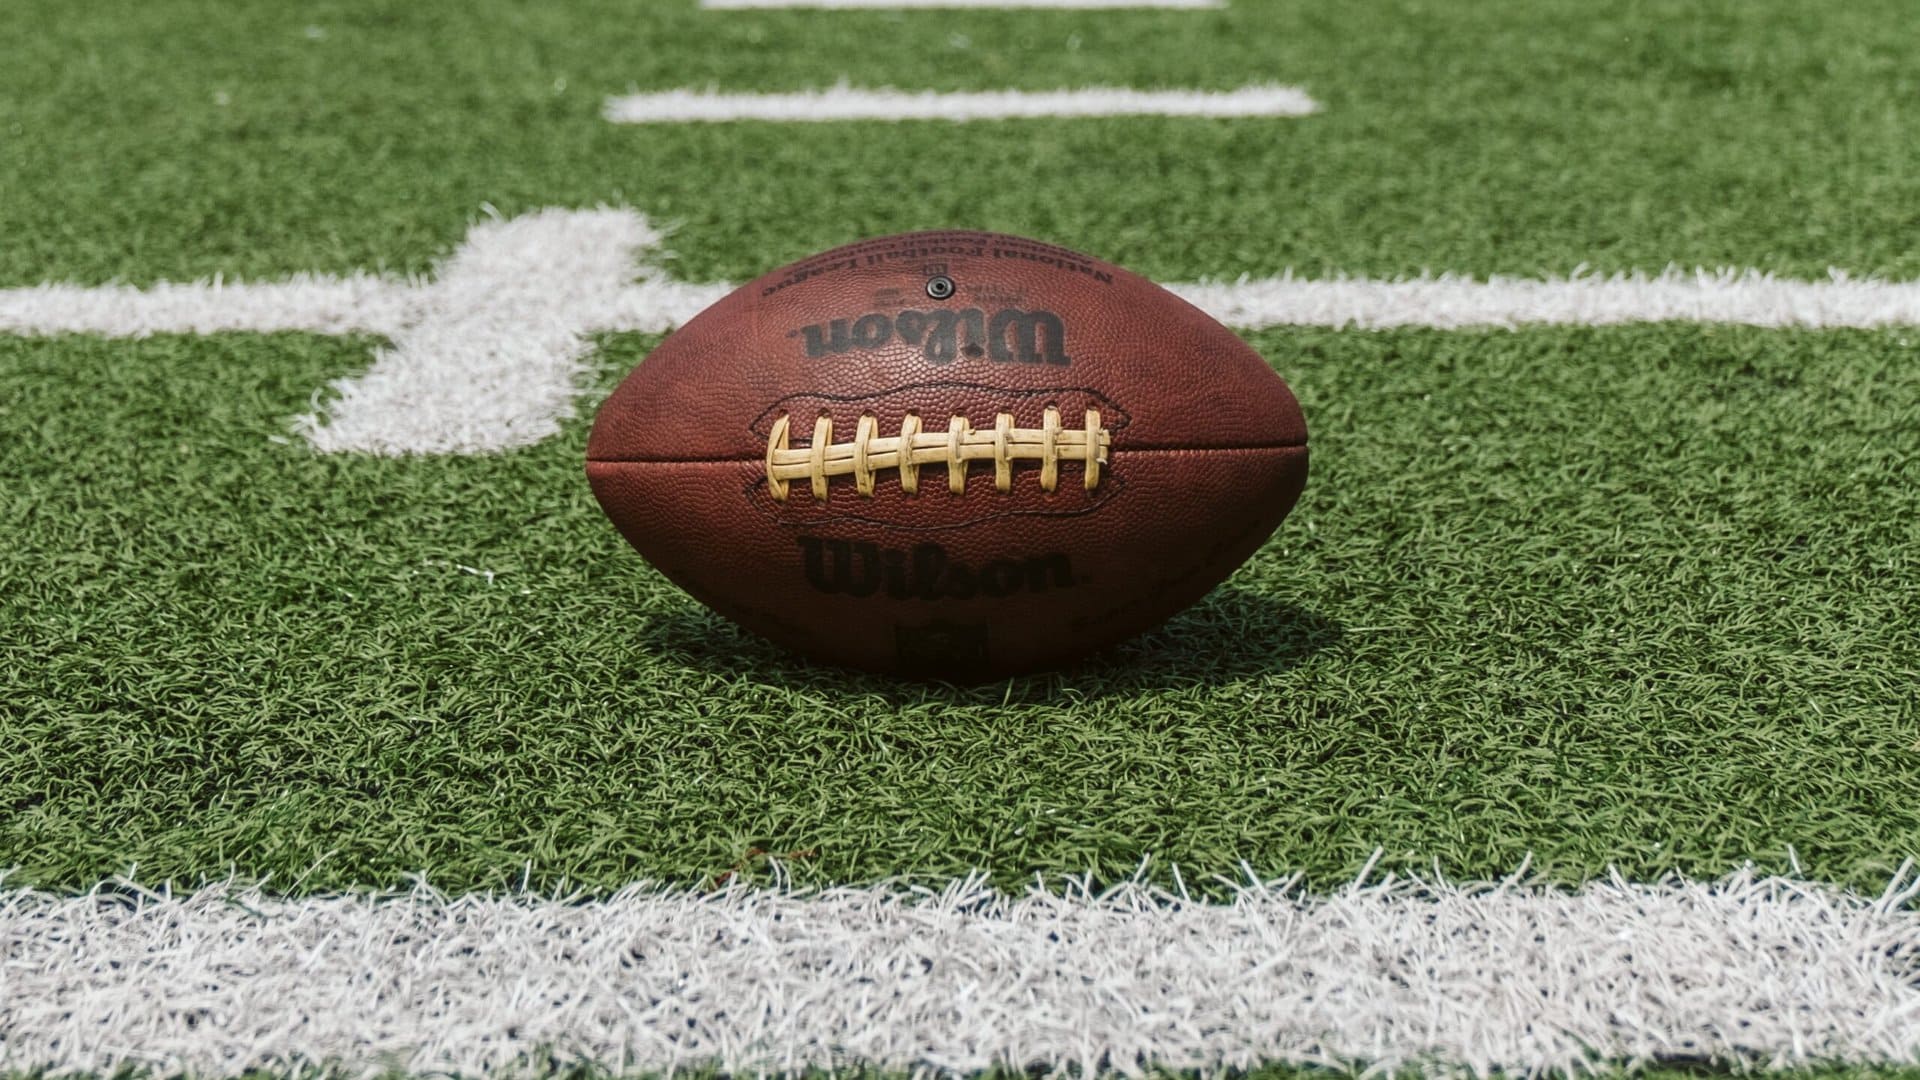 The Best Super Bowl PR for Brands Doesn’t Involve the Big Game